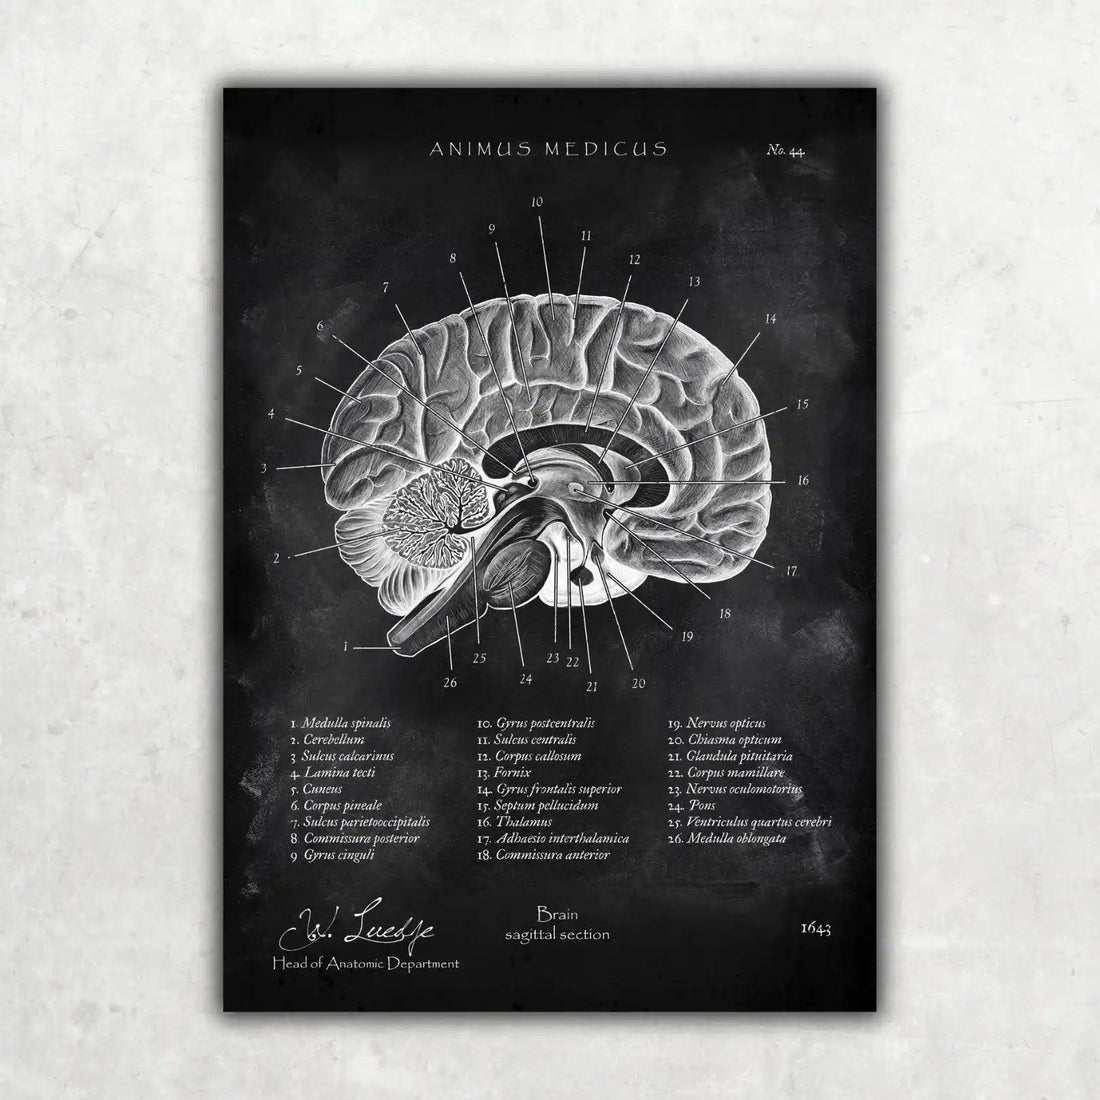 apparatus poster thinking GmbH Our Animus a – Brain Poster Medicus – as